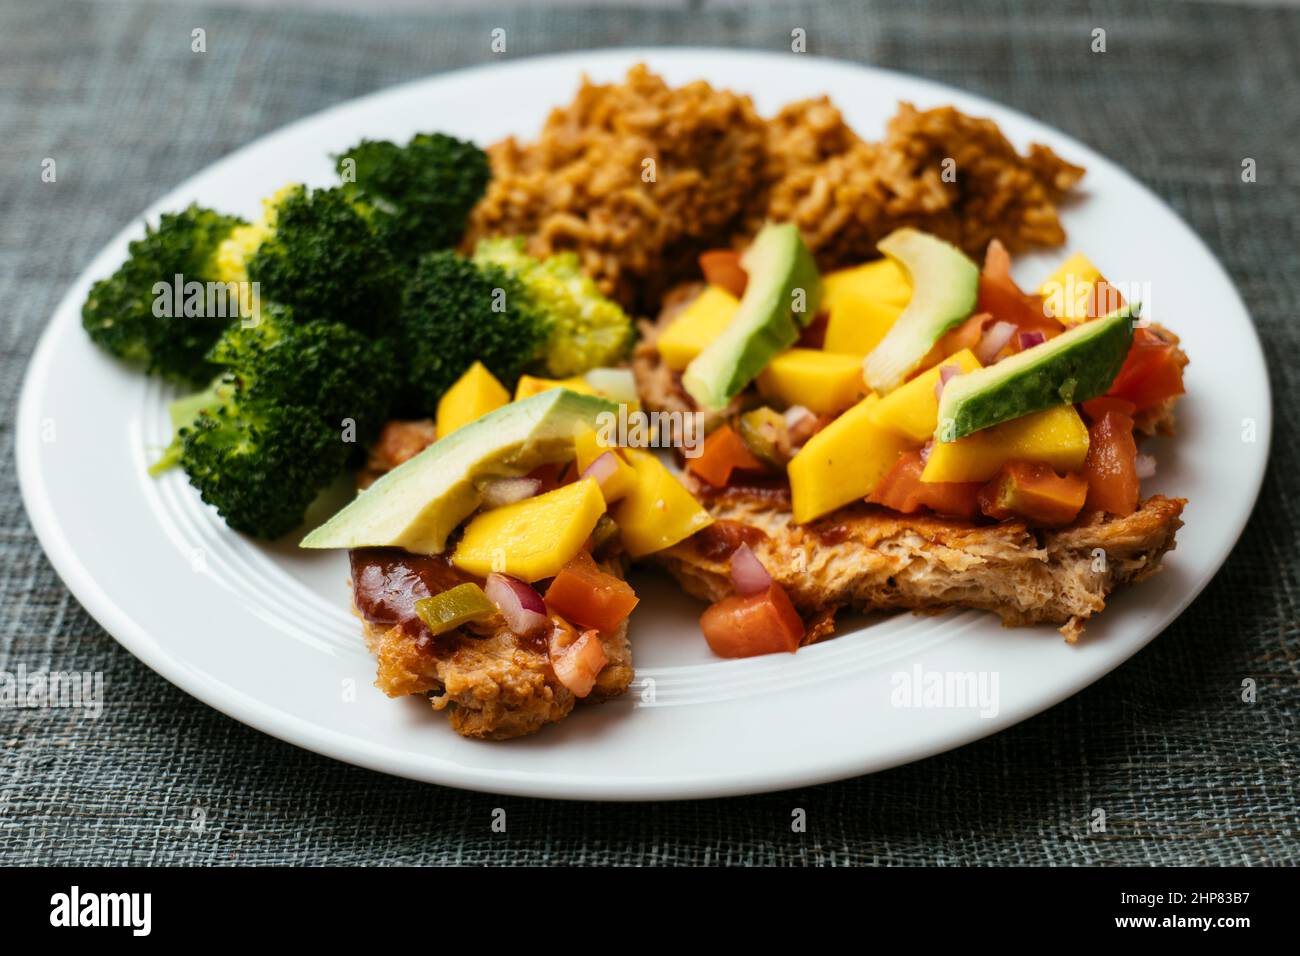 Spicy TVP Cutlets with Mango Salsa, Mexican Rice and Broccoli Stock Photo